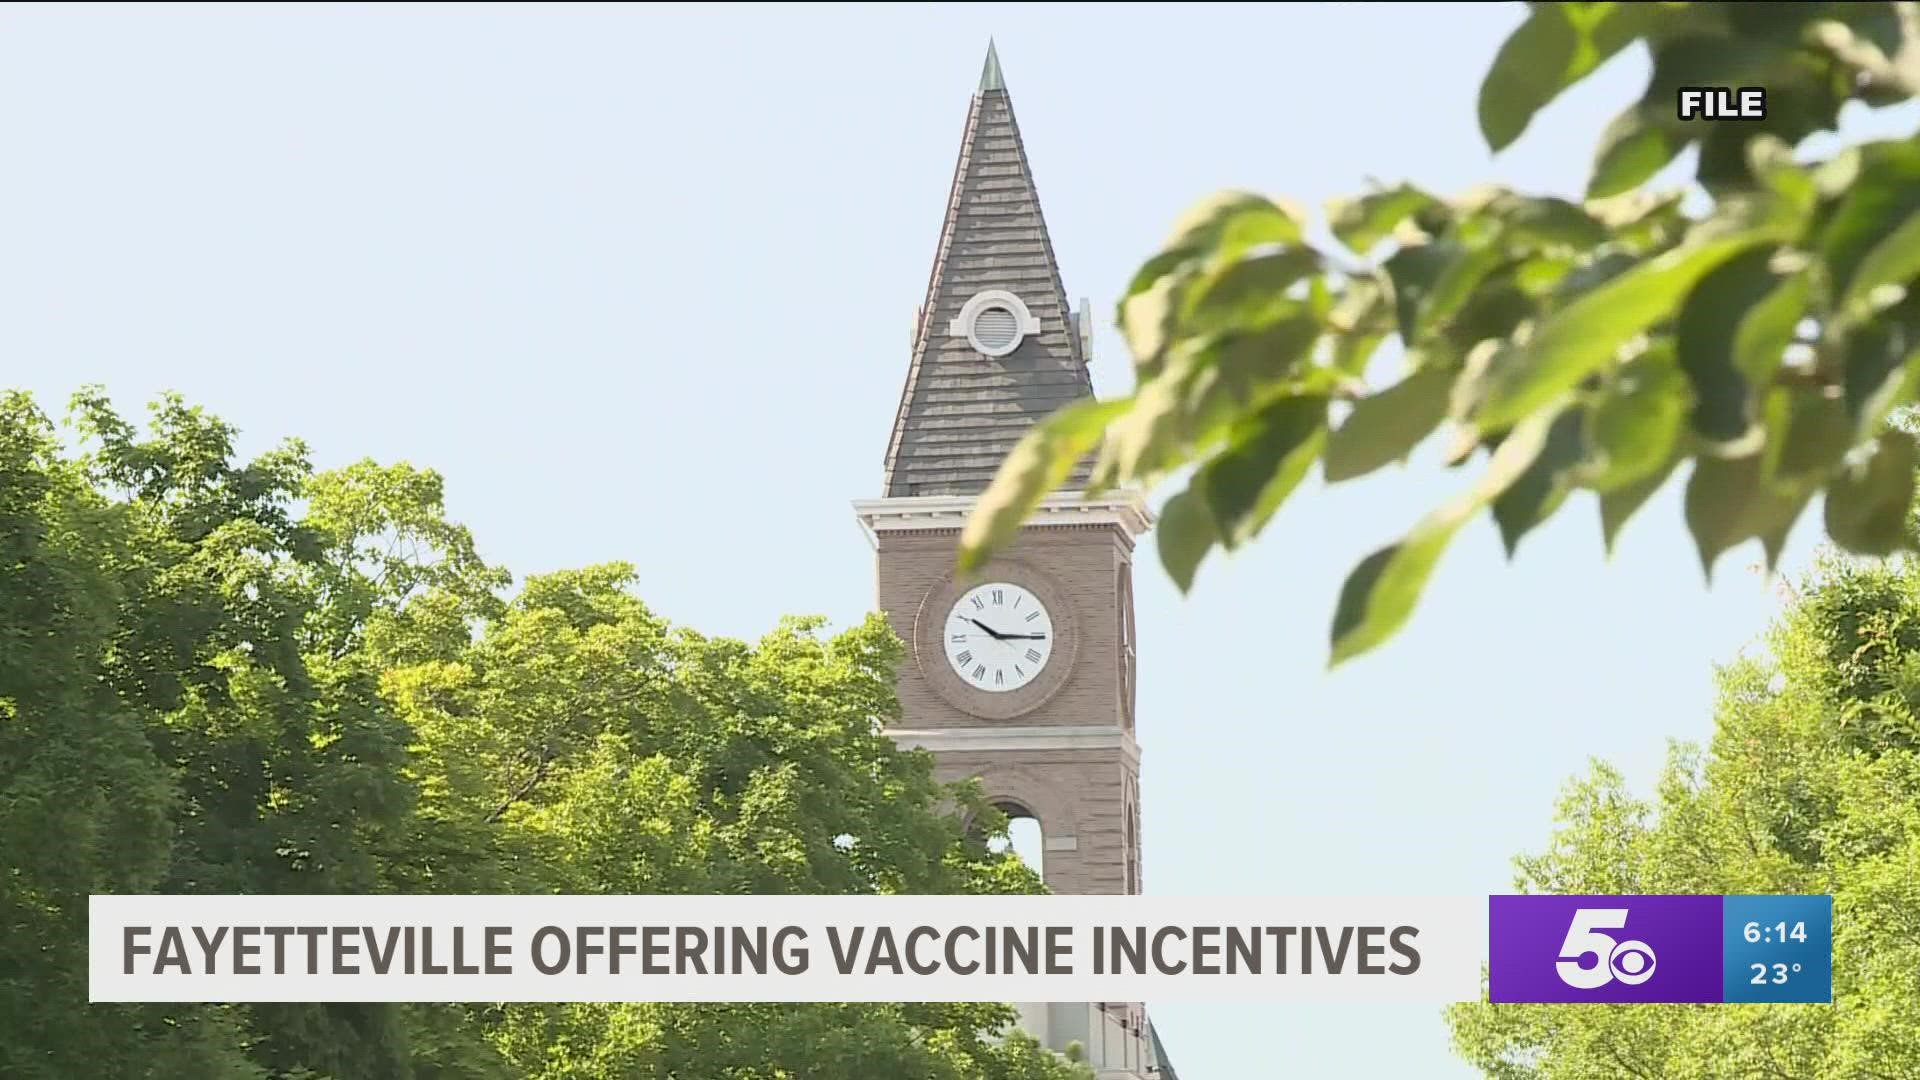 In an effort to get more residents vaccinated, the City of Fayetteville's Vaccine Incentive Program is offering residents $100 for proof of vaccination.